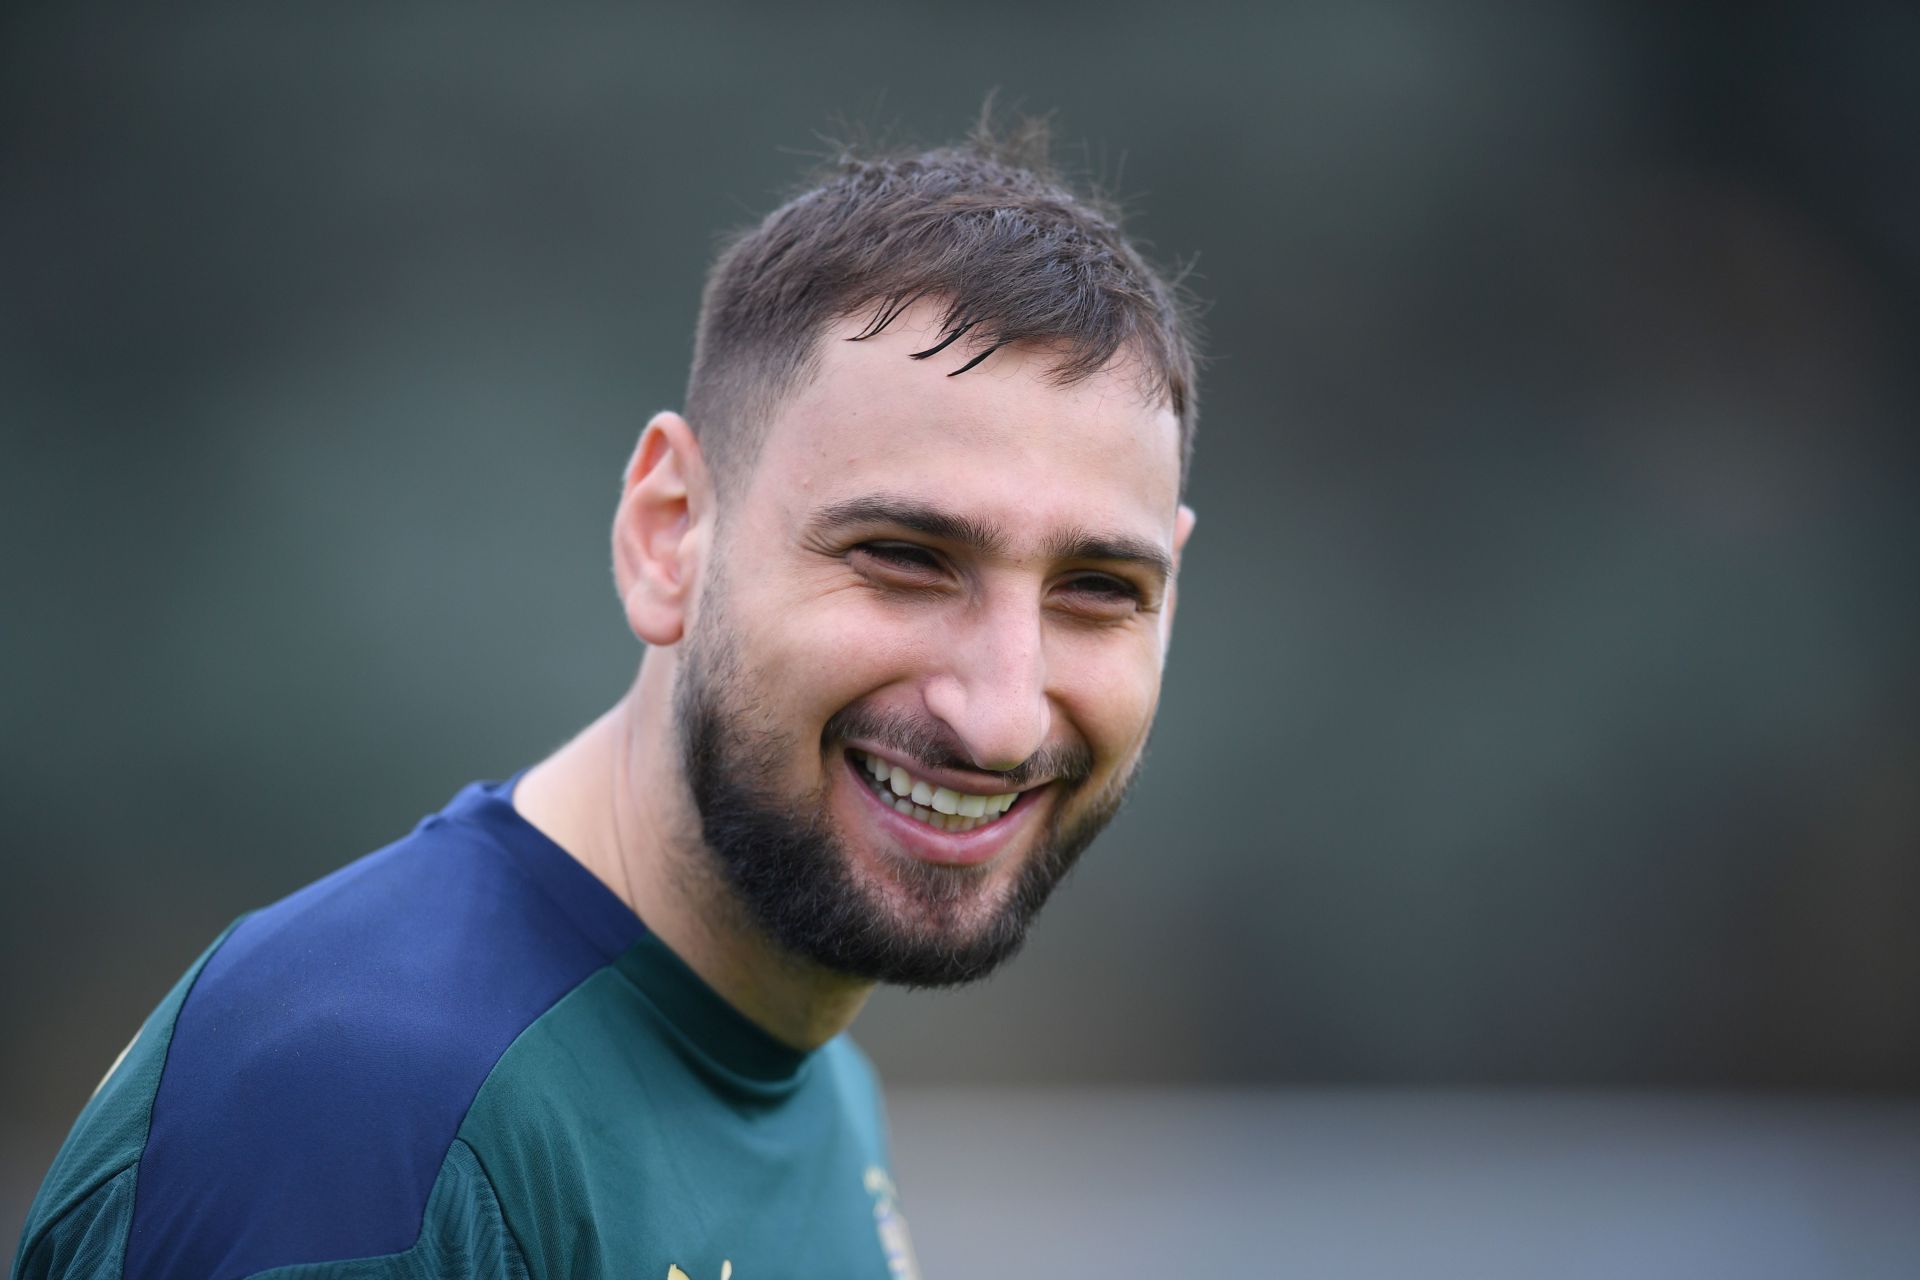 Gianluigi Donnarumma has said that the team spirit at PSG is one of the strengths of the club.